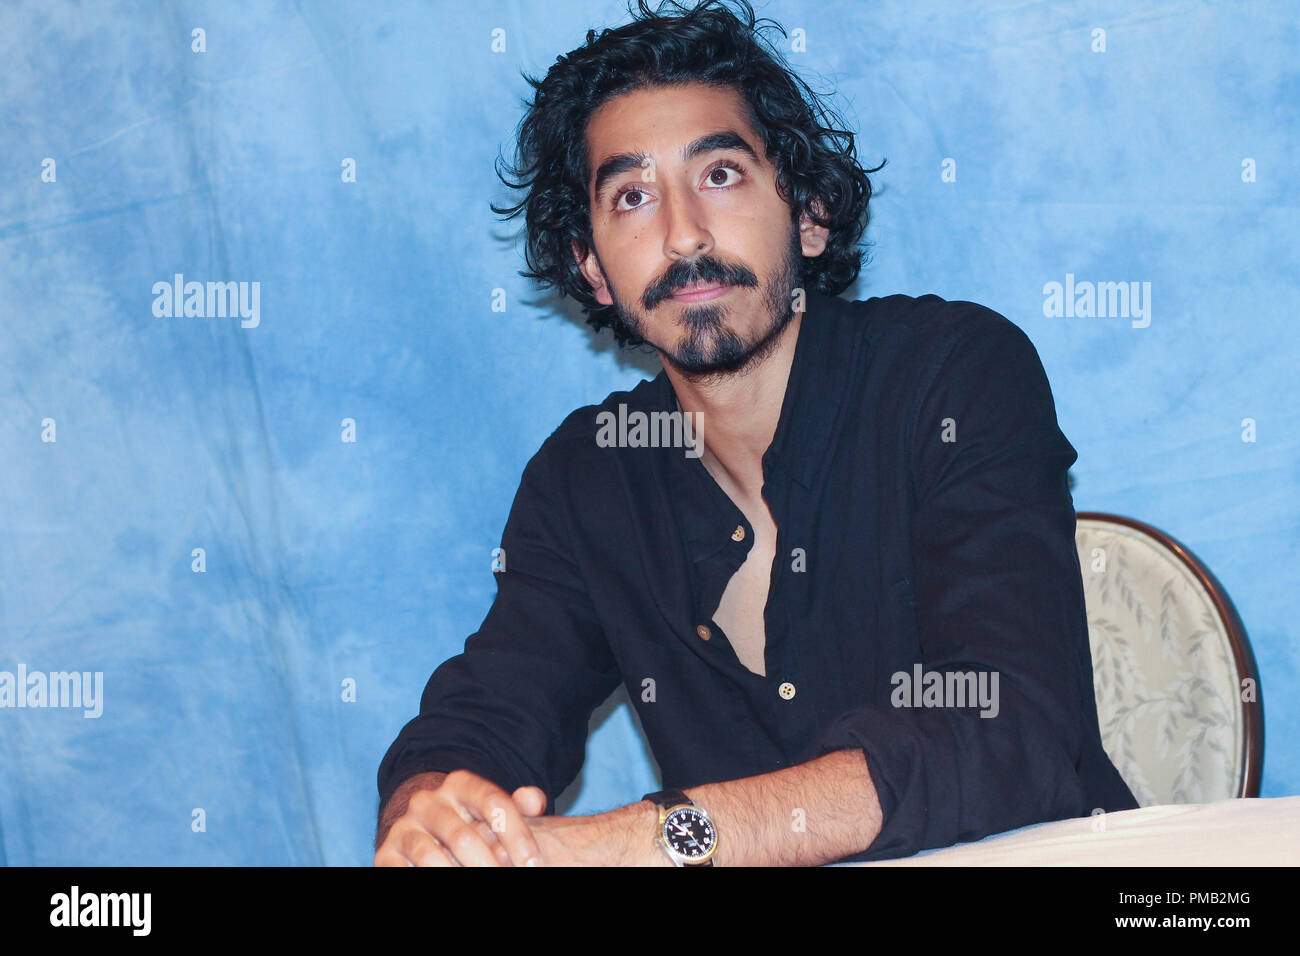 Dev Patel at 'Lion' Press Conference held on November 12, 2016 at the Four Seasons Hotel in Beverly Hills,  California. No Tabloids. No USA sales for 30 days of origination.  File Reference # 33163 024JRC  For Editorial Use Only -  All Rights Reserved Stock Photo